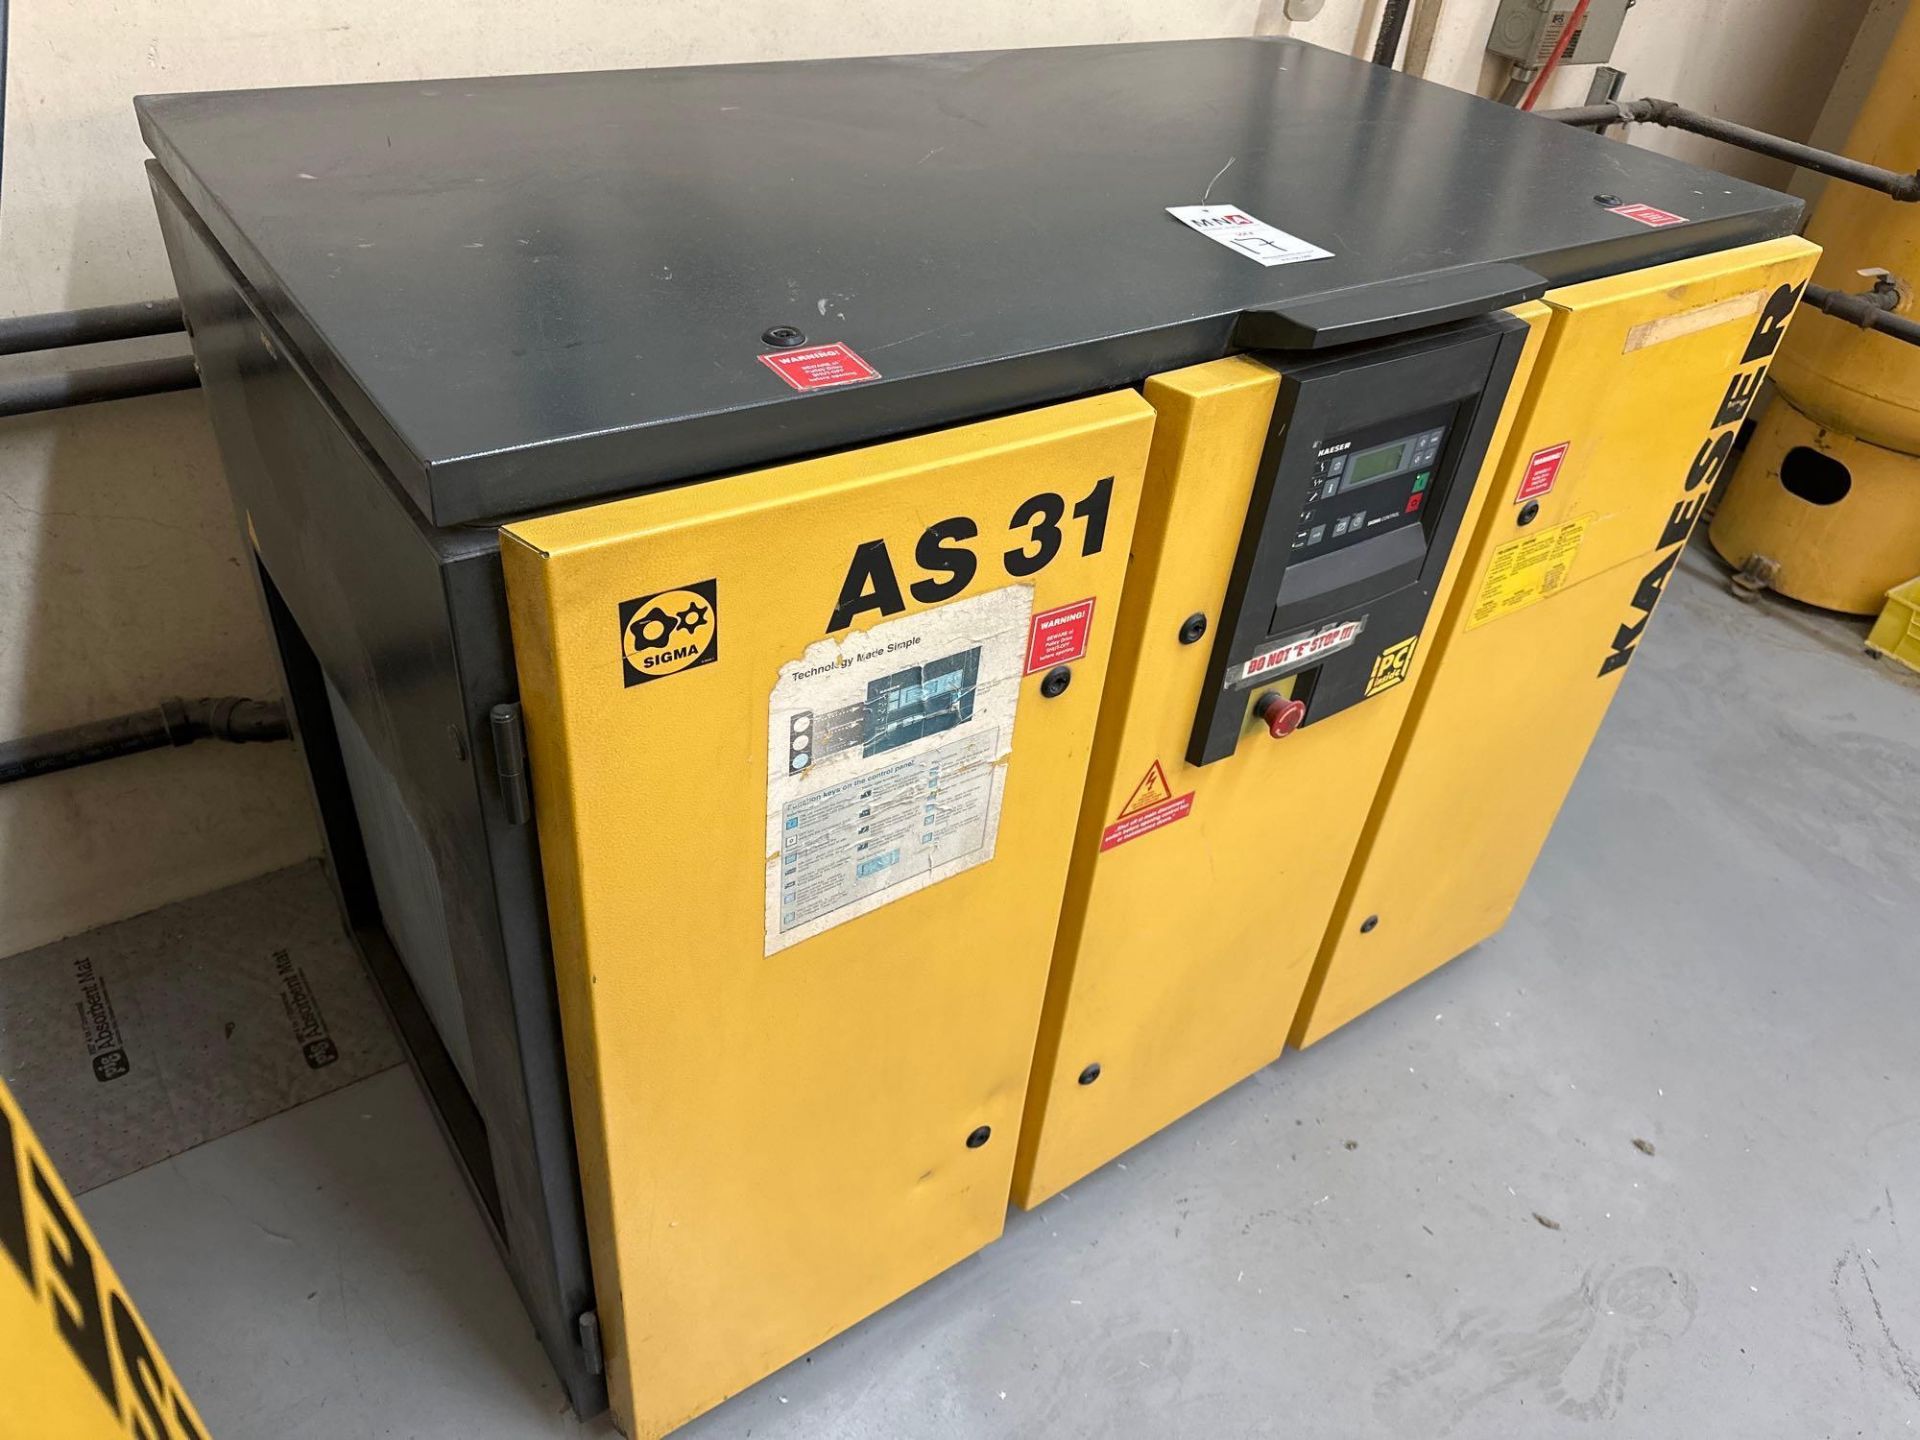 Kaeser AS31 Rotary Screw Air Compressor, 25 HP, 74567hrs - Image 3 of 5